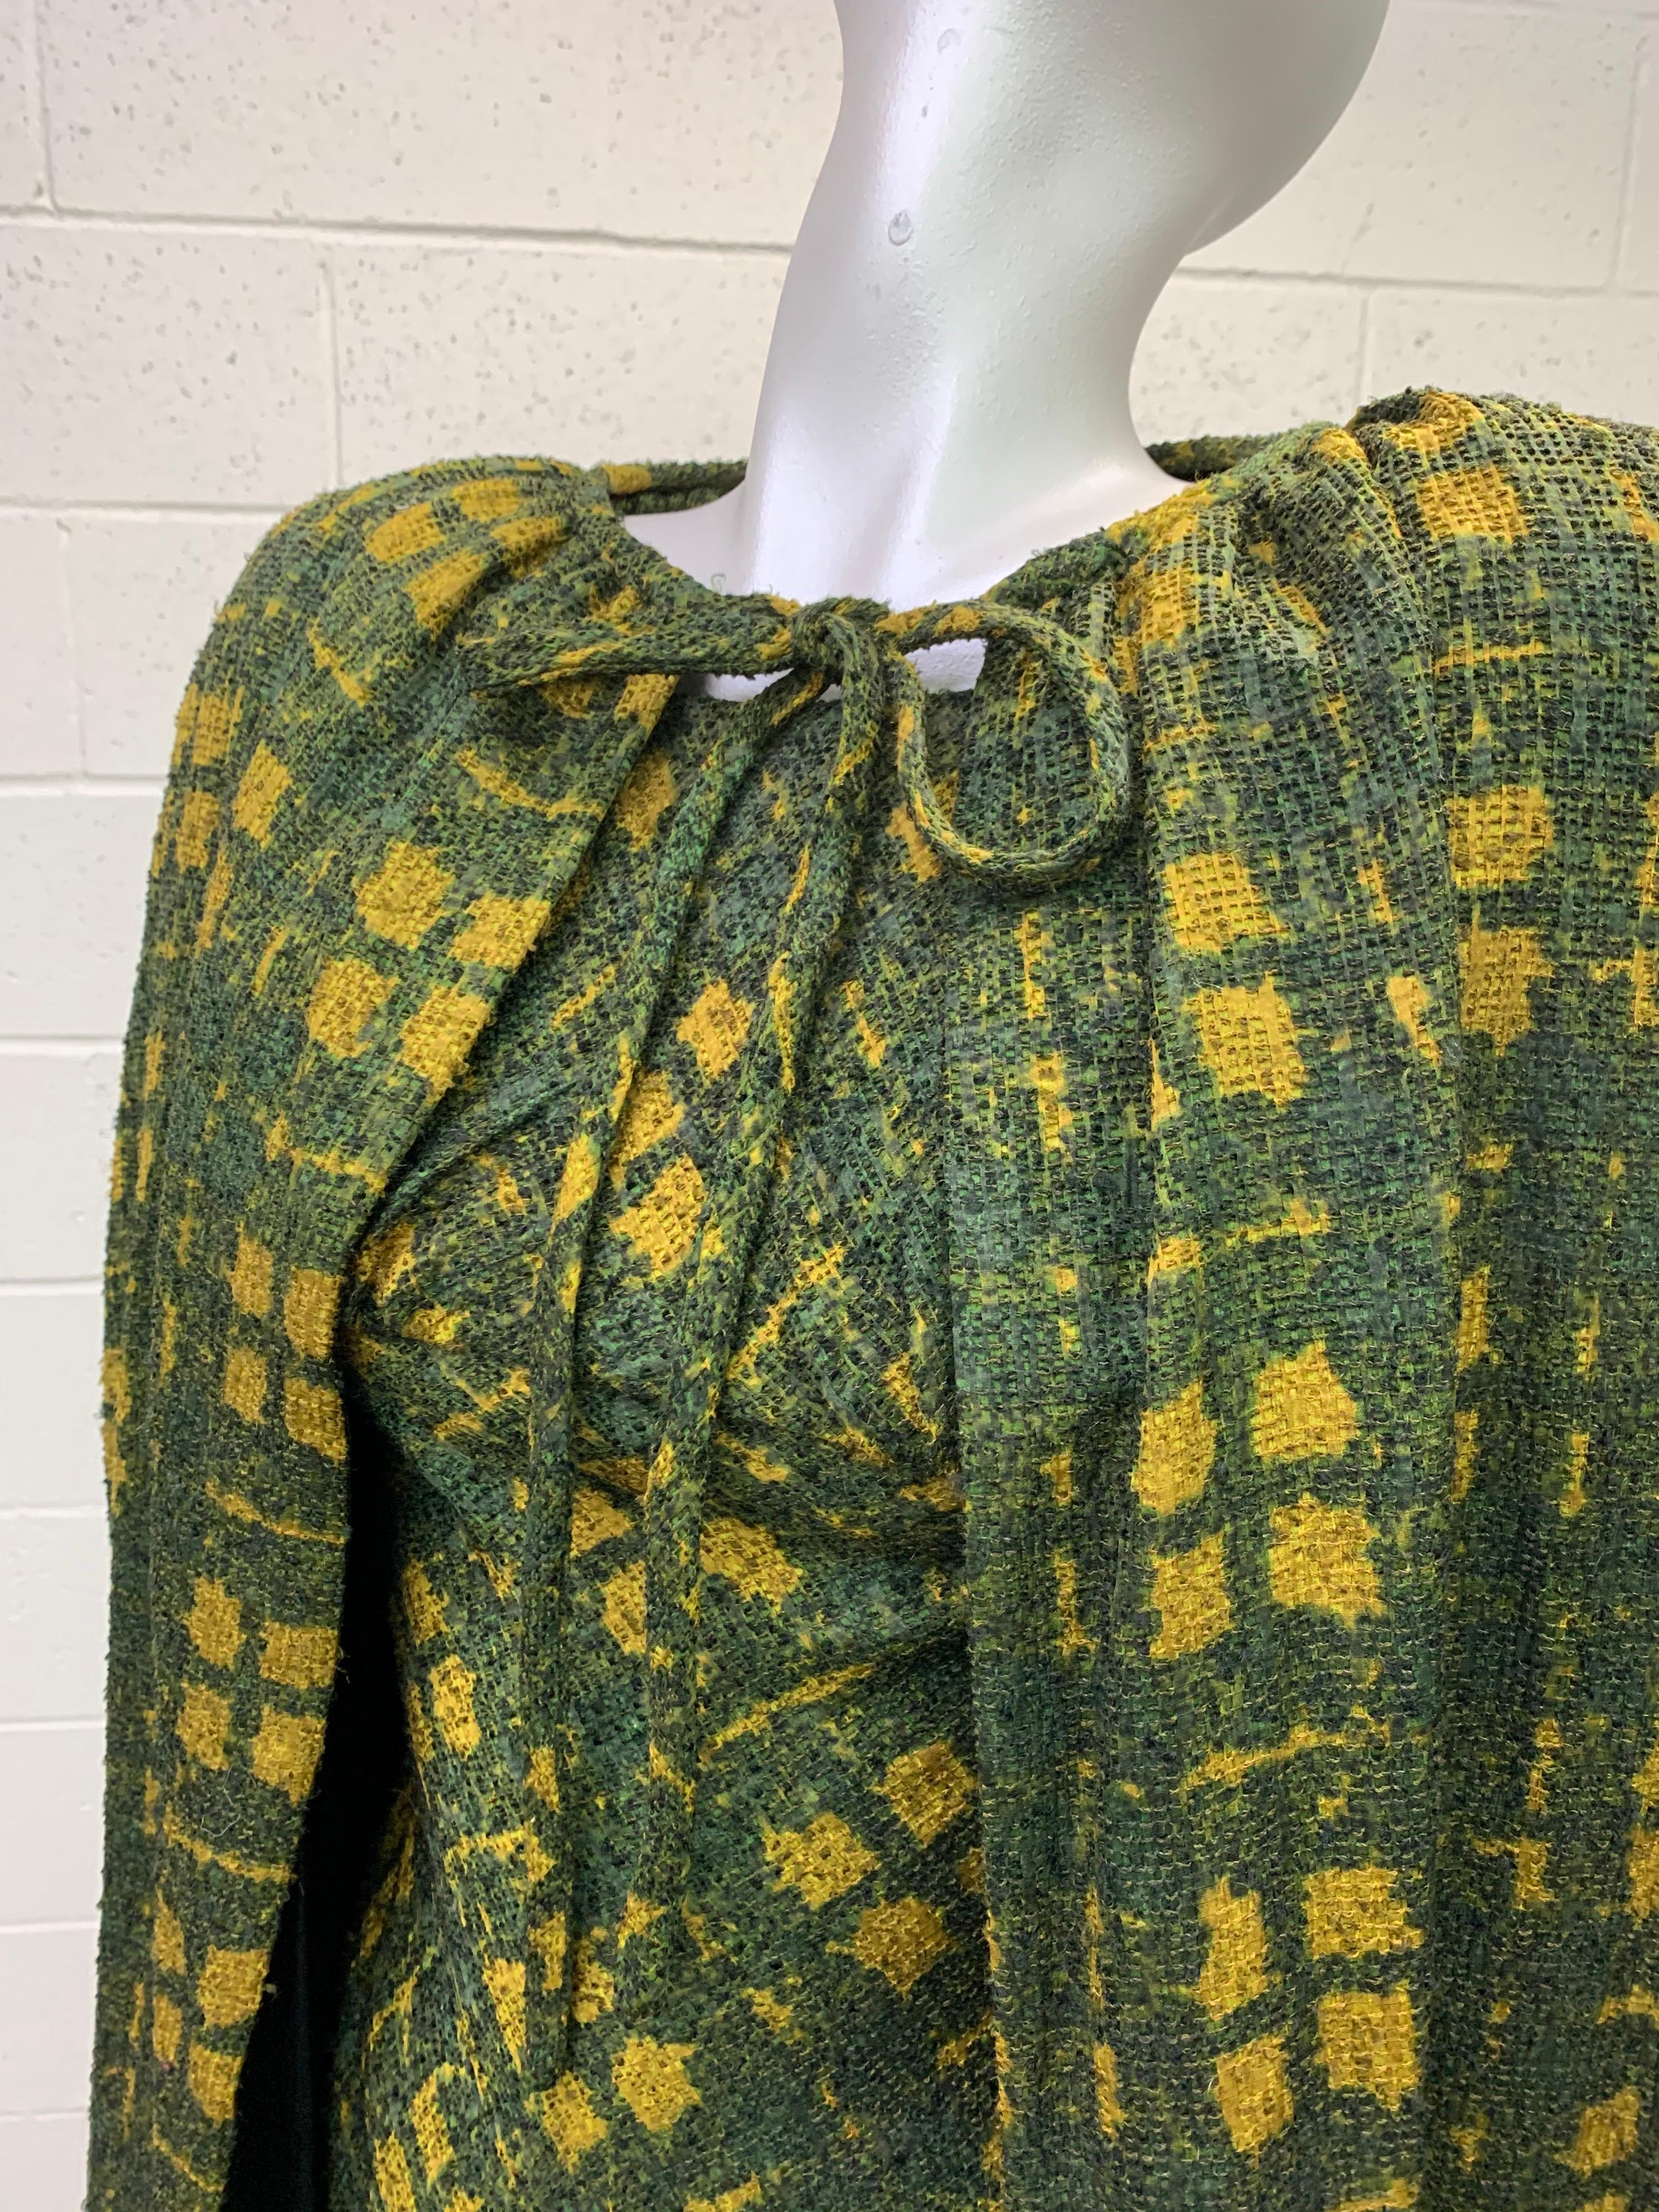 An exquisite 1950s James Galanos olive green and mustard plaid fine wool boucle woven dress and cape ensemble:  Dress is long-sleeved and cut on the bias with a gathered boatneck neckline. Olive silk dress lining. Side zipper on dress. Size 6. The